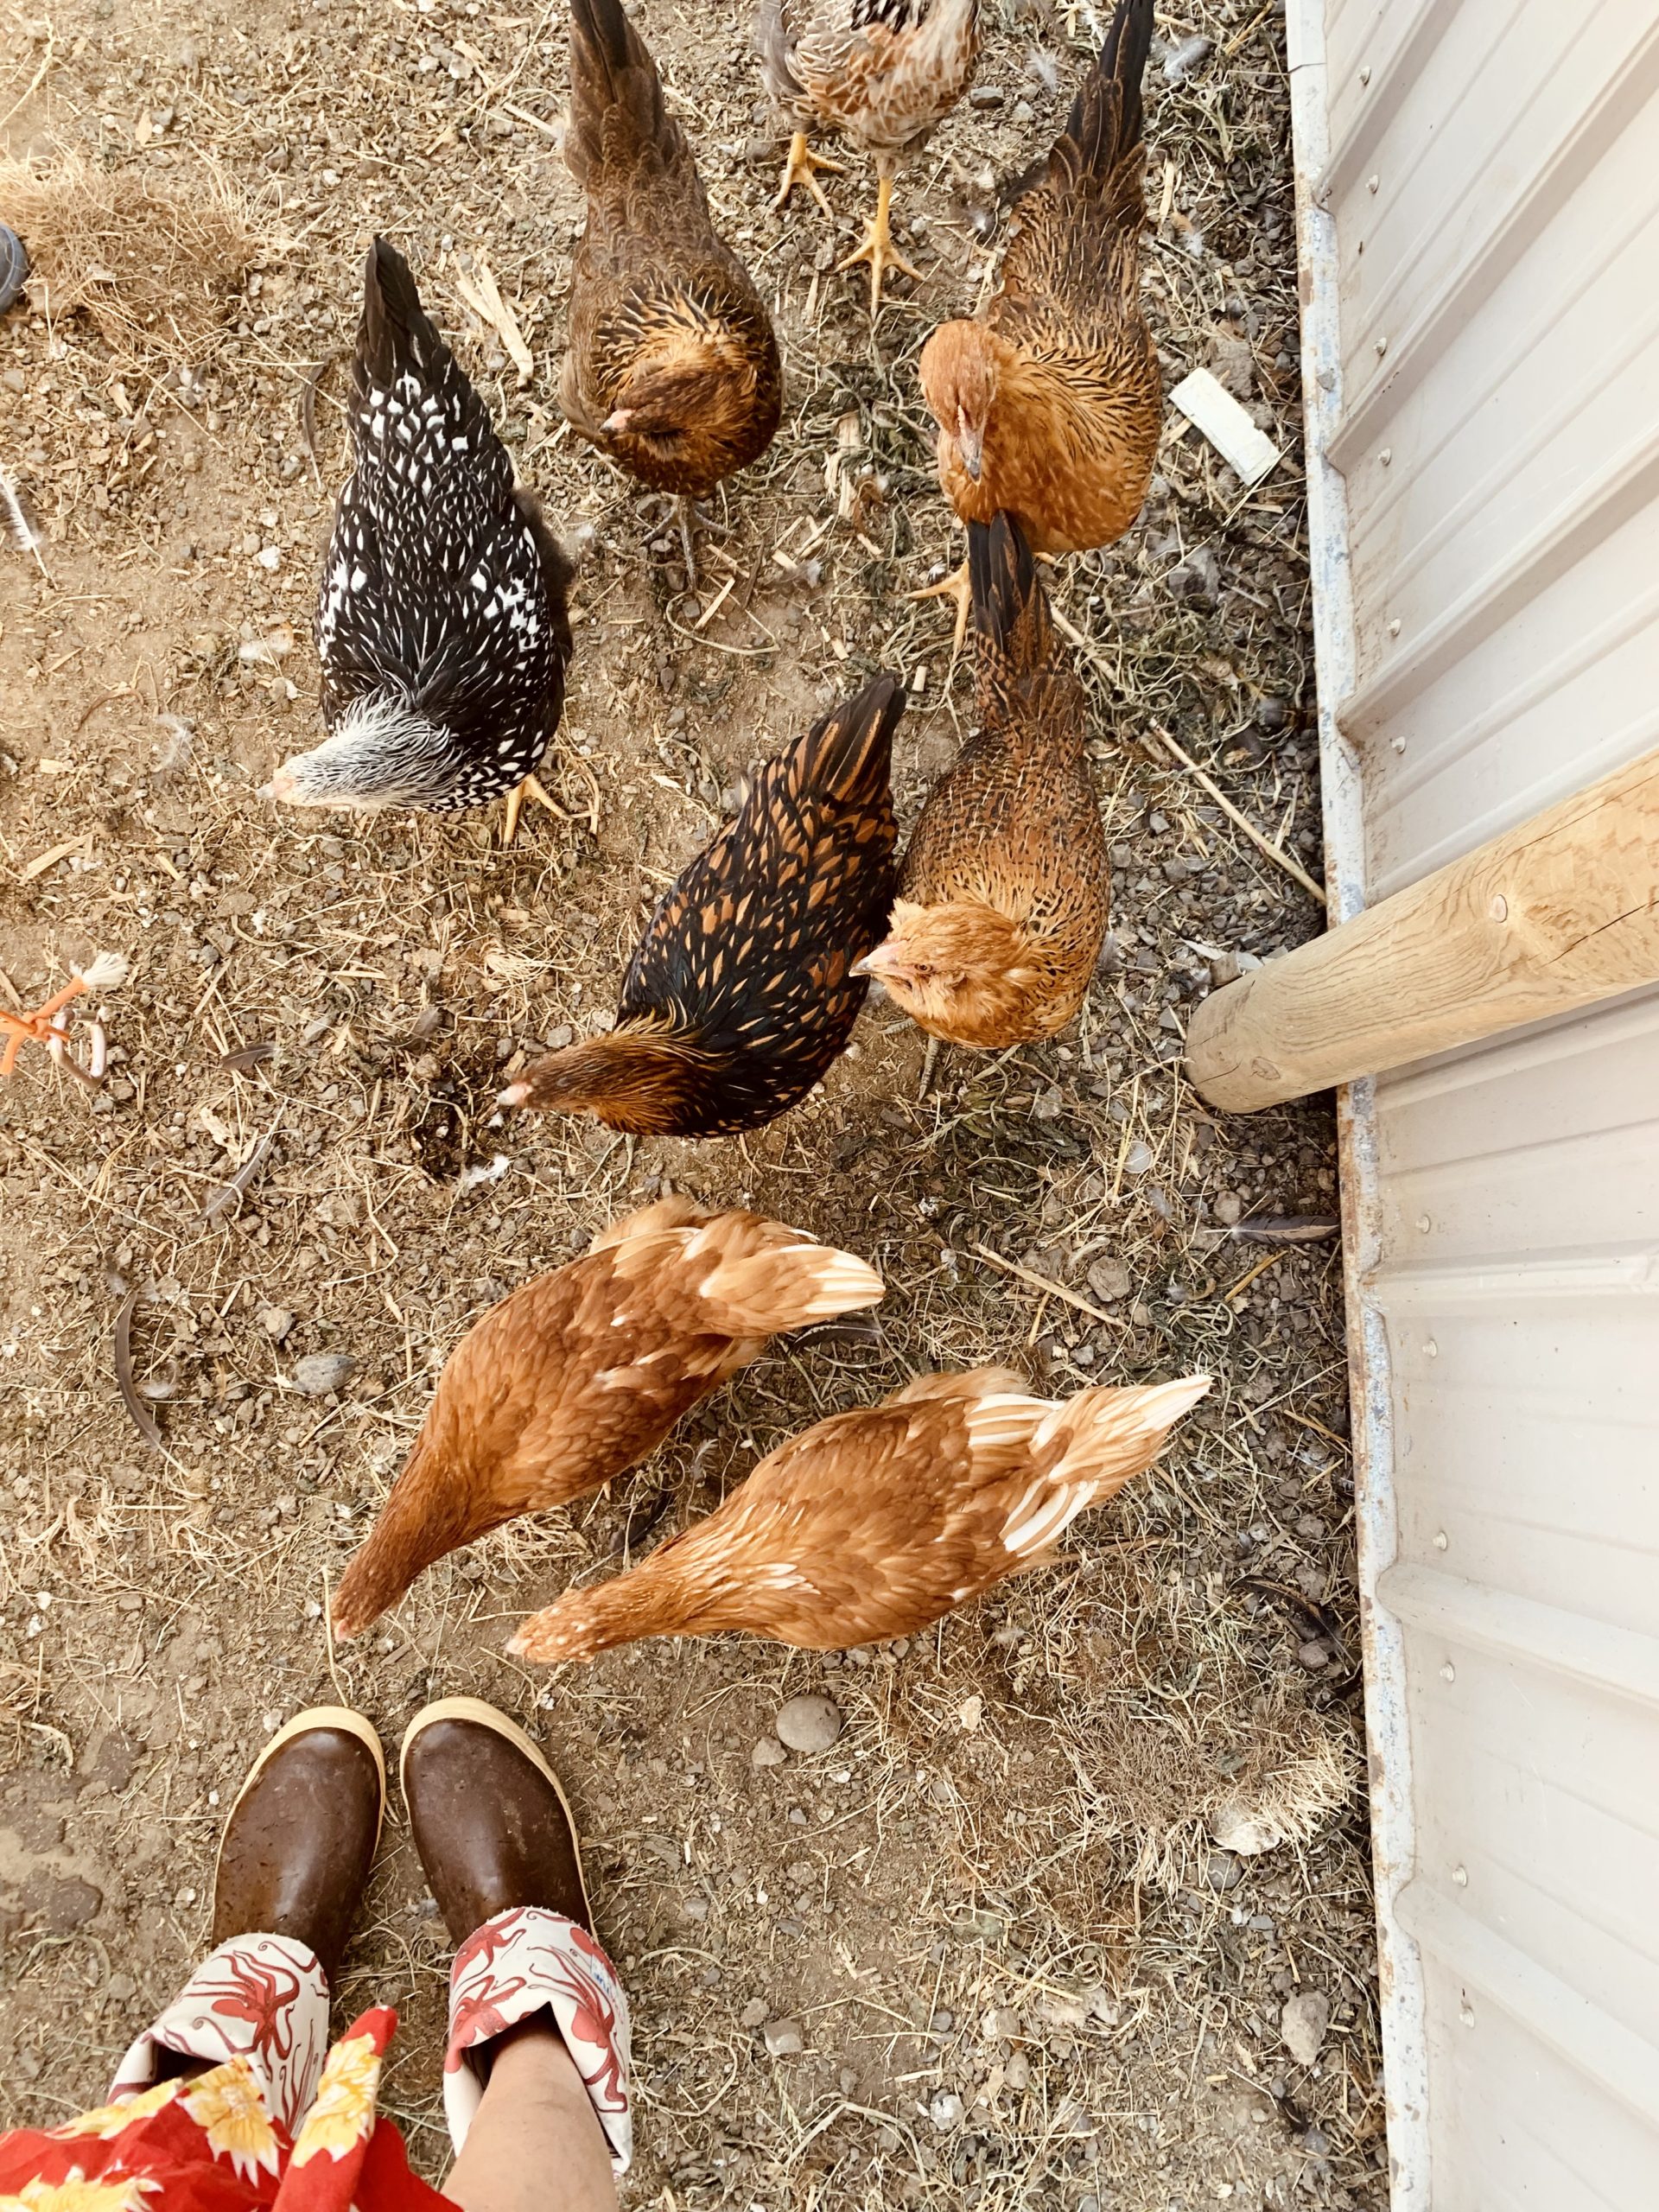 Discovering a Rooster in the Hen House